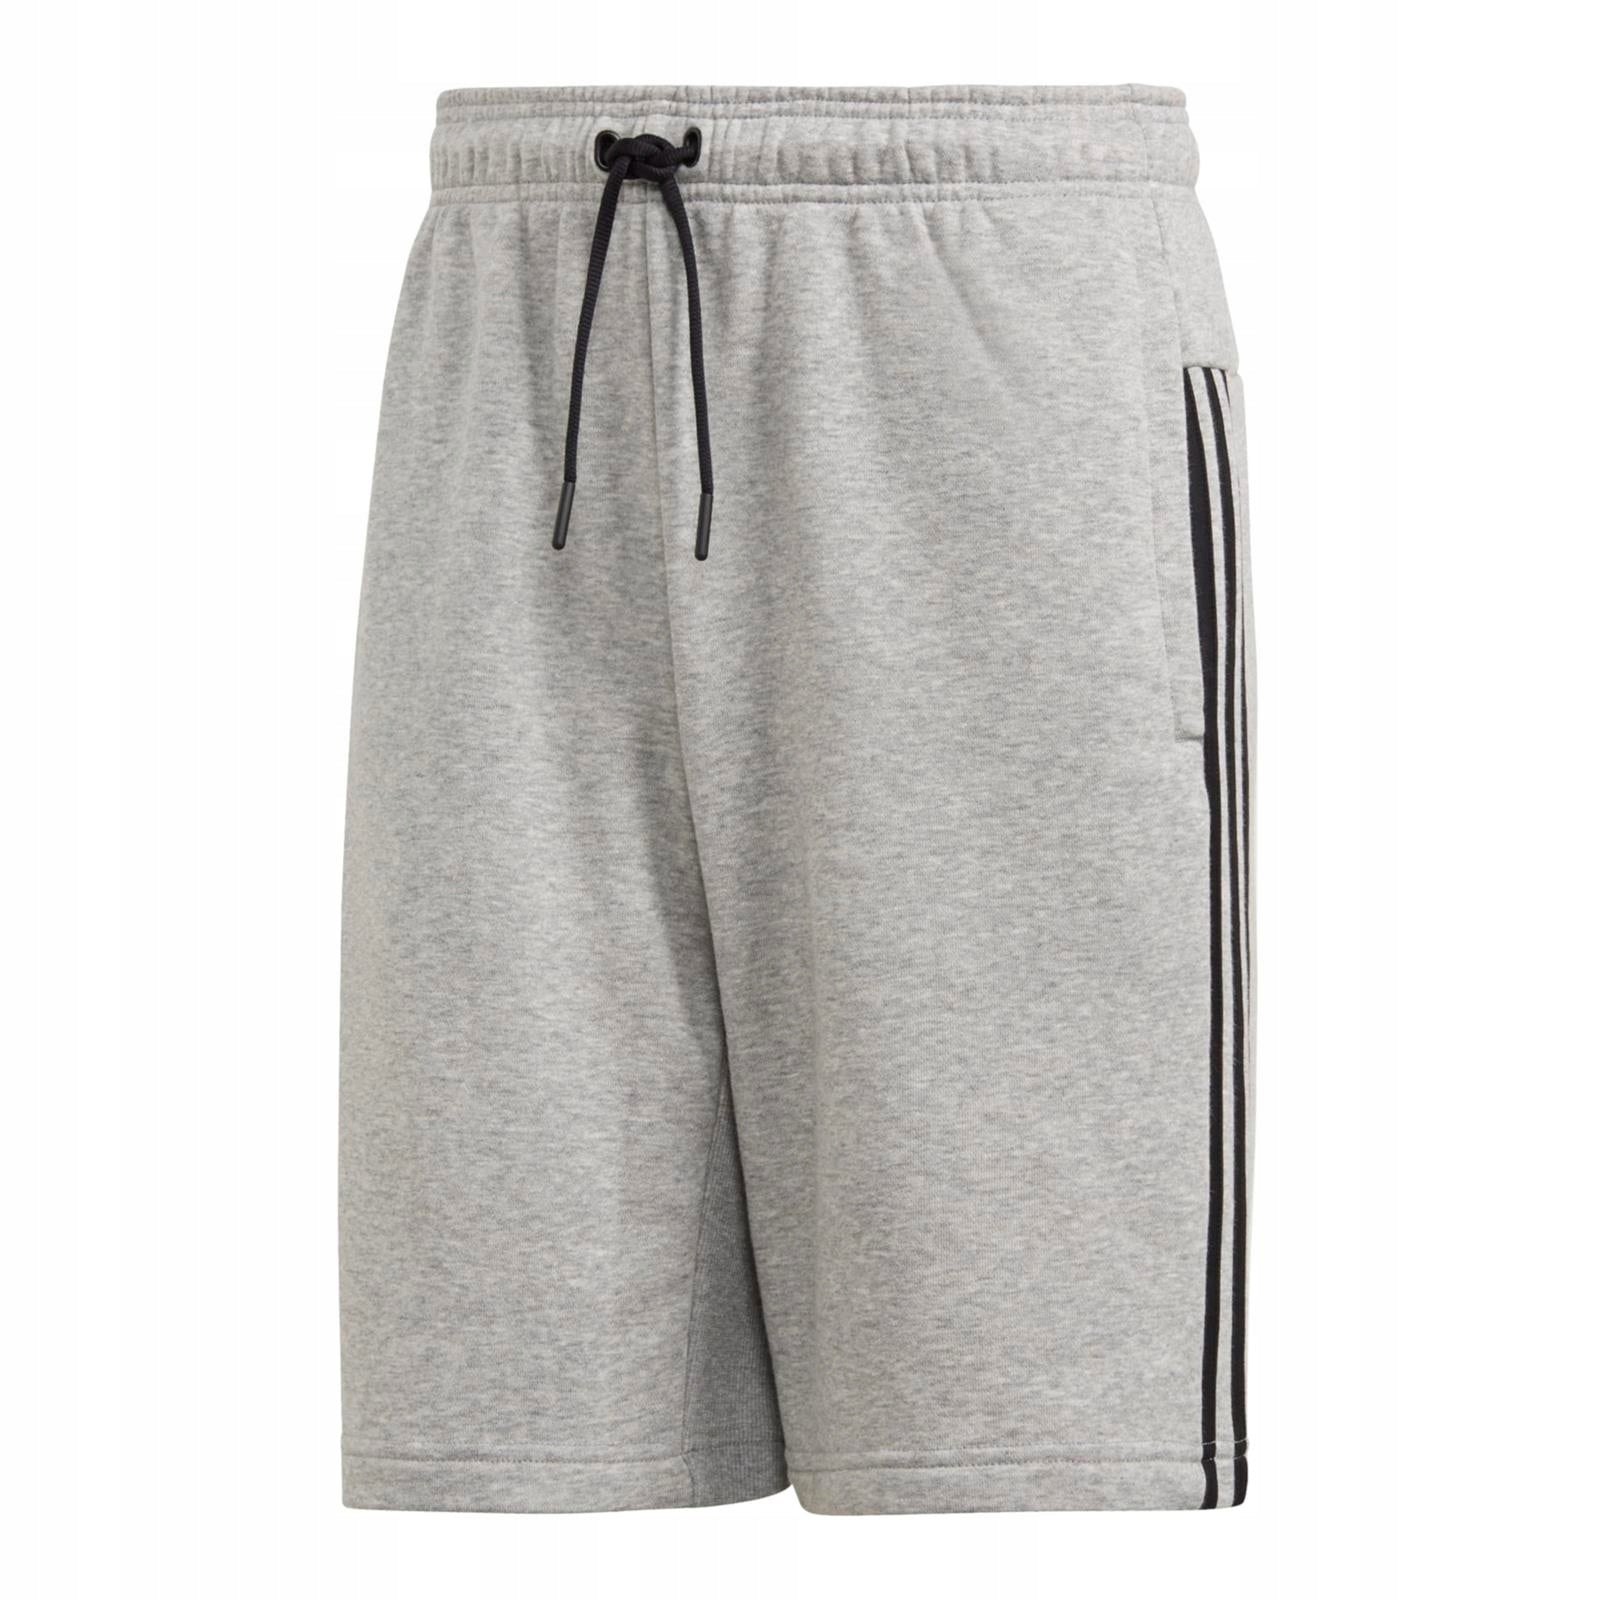 Adidas 3-Stripes French Terry Shorts DT9902